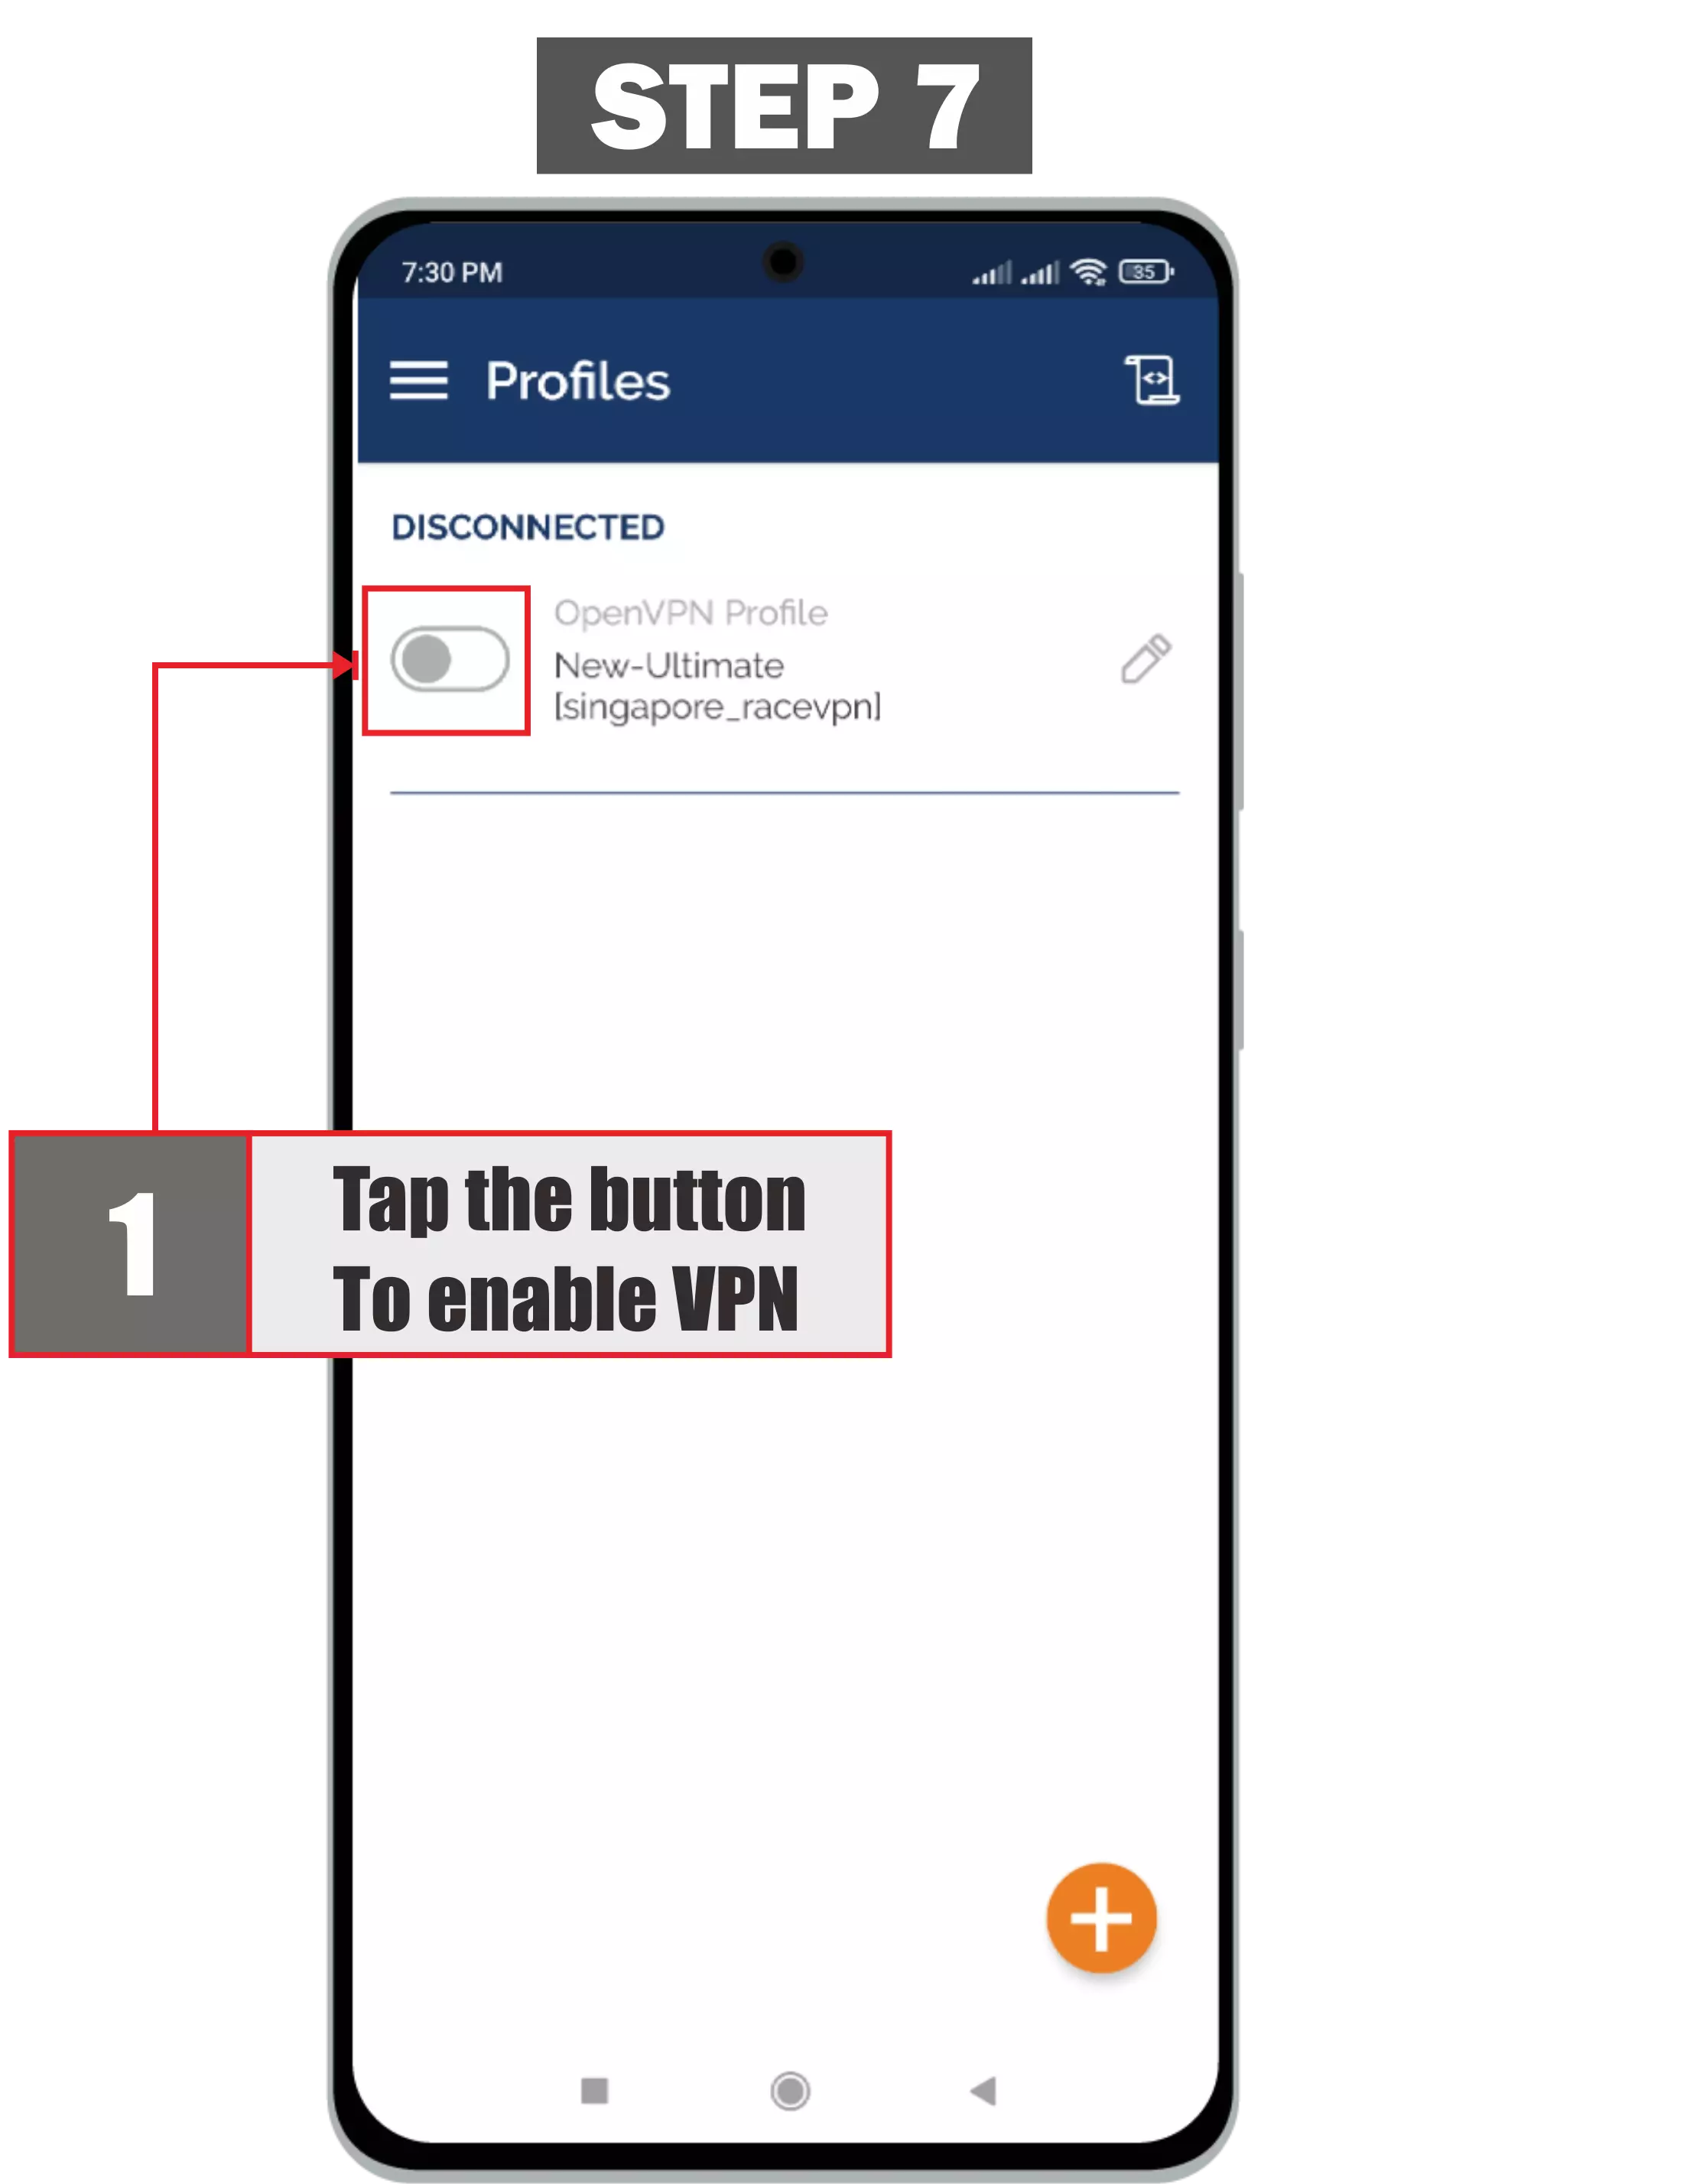 The last step is how to use openvpn on android